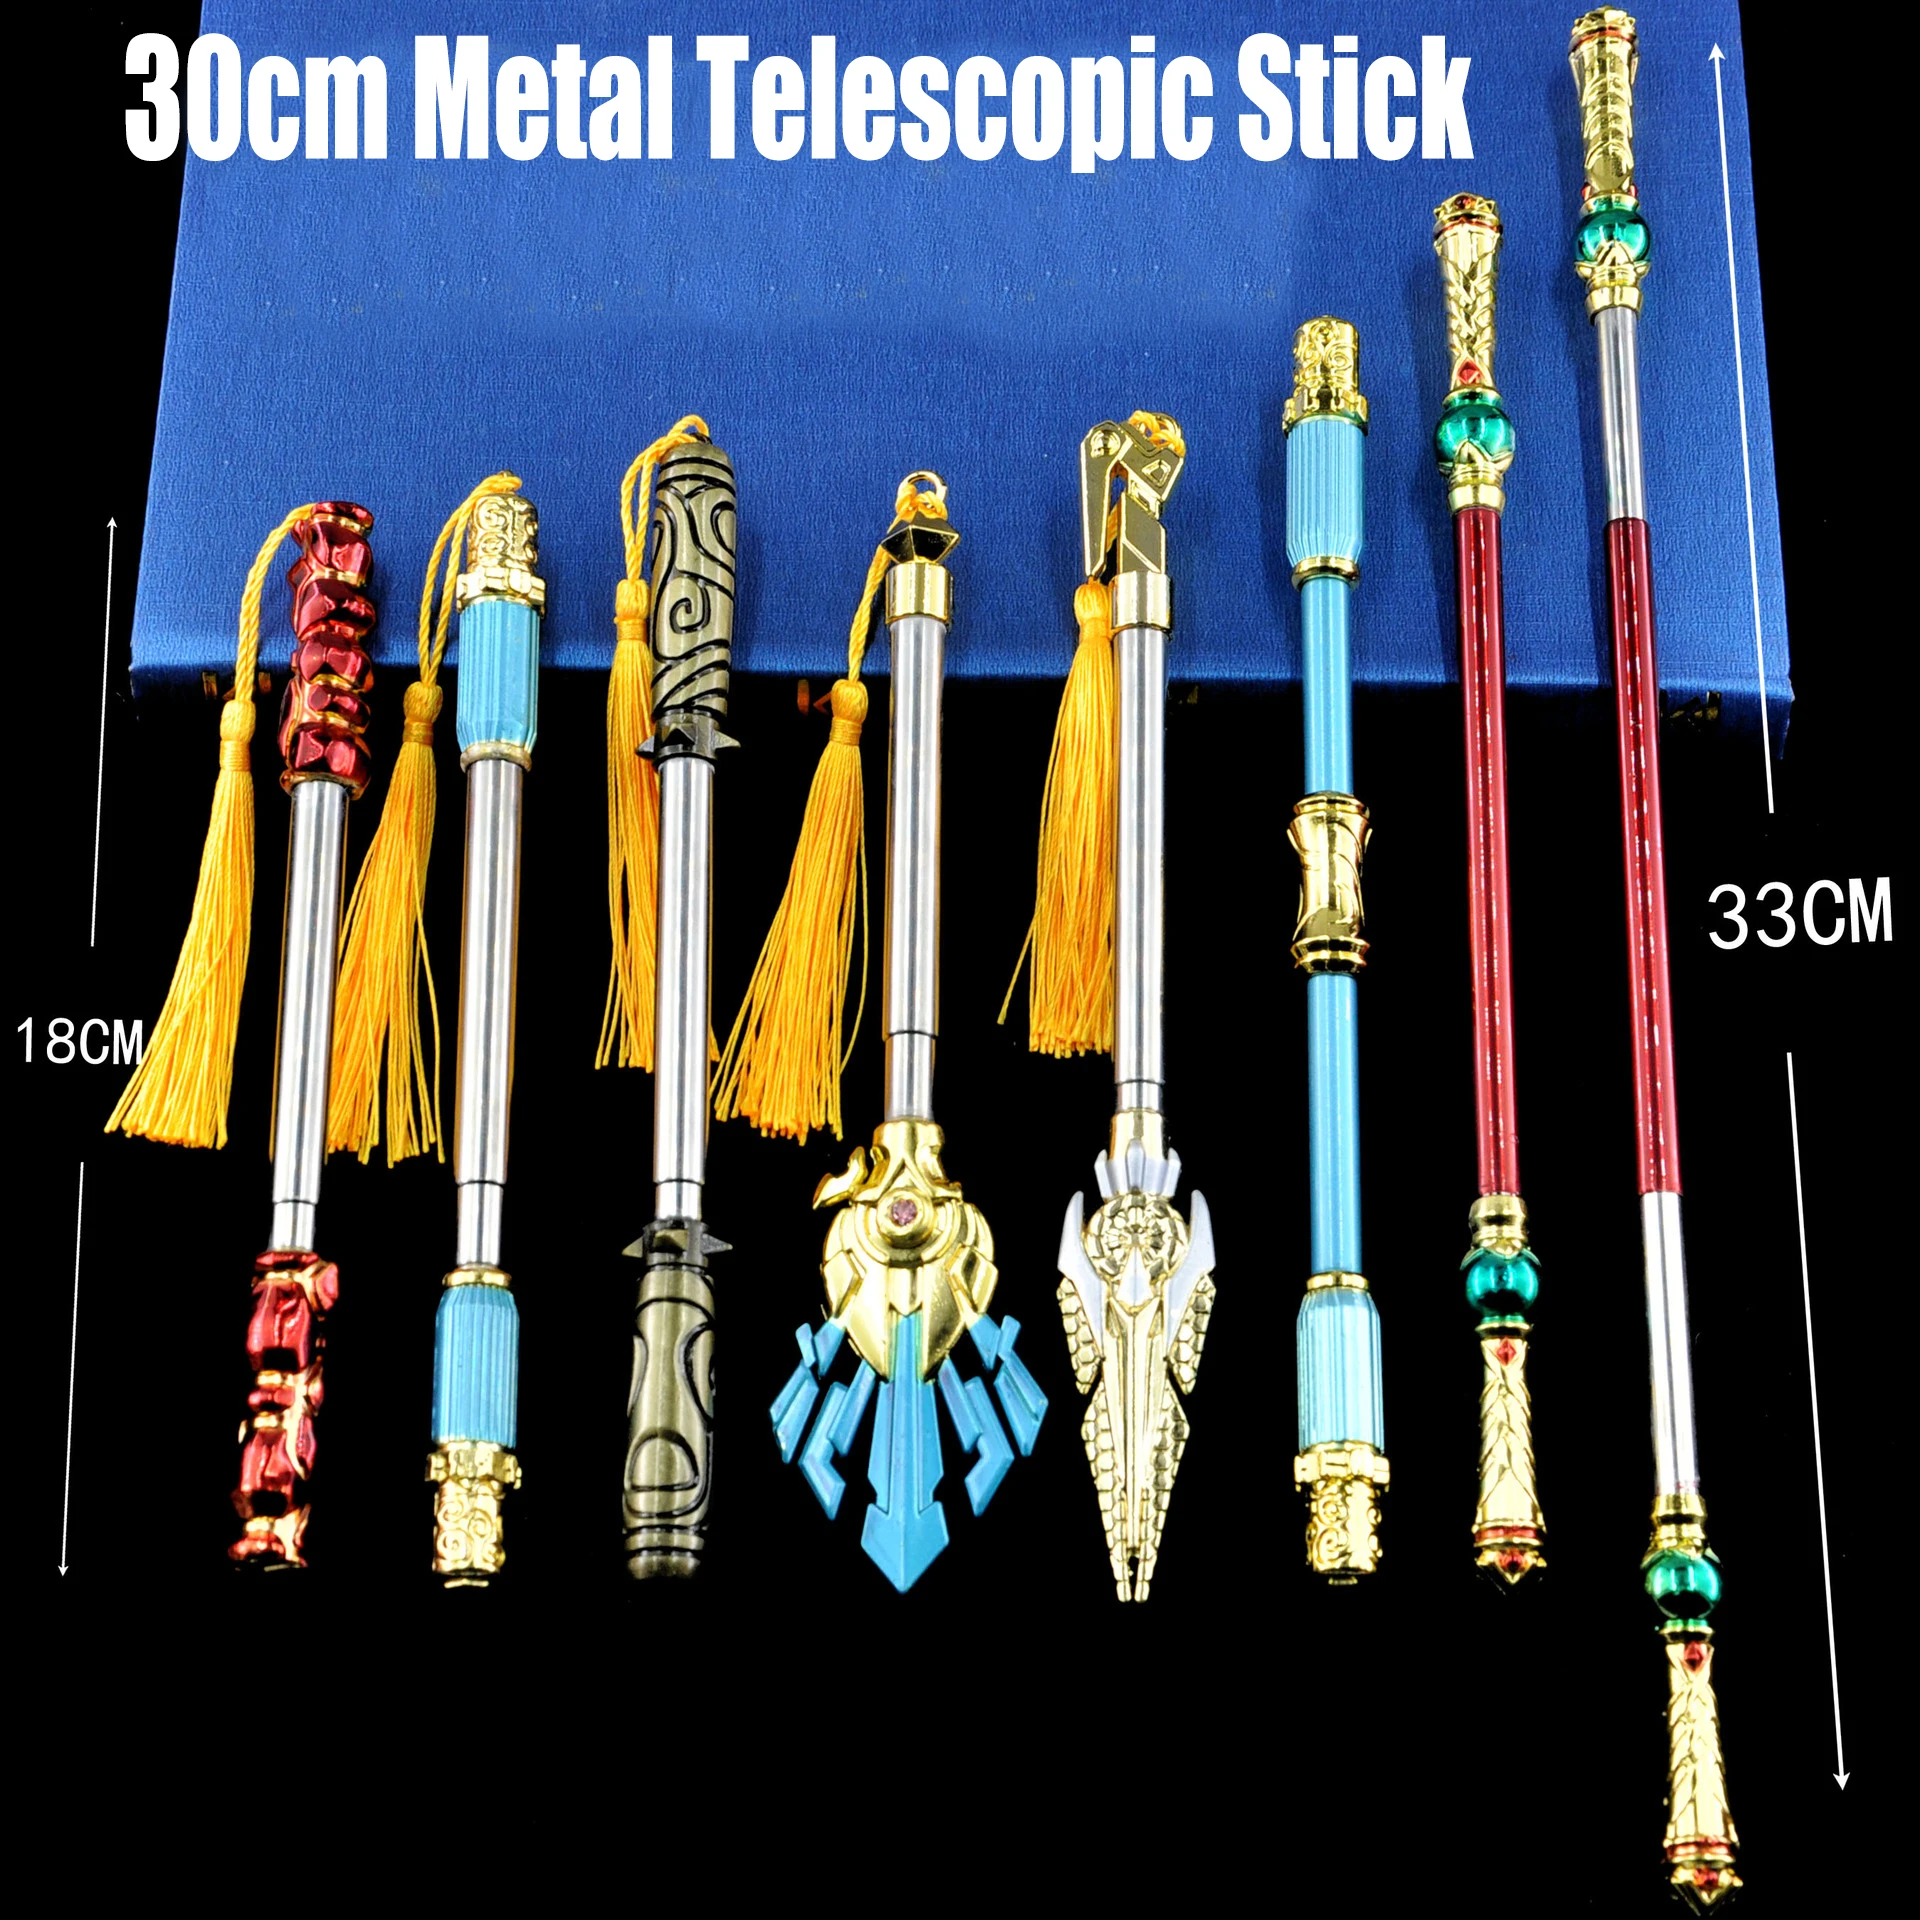 30cm Metal Telescopic Stick Model Manga Anime Character Accessories Peripherals Toy Weapons Japanese Ninja Prop Collection Gift